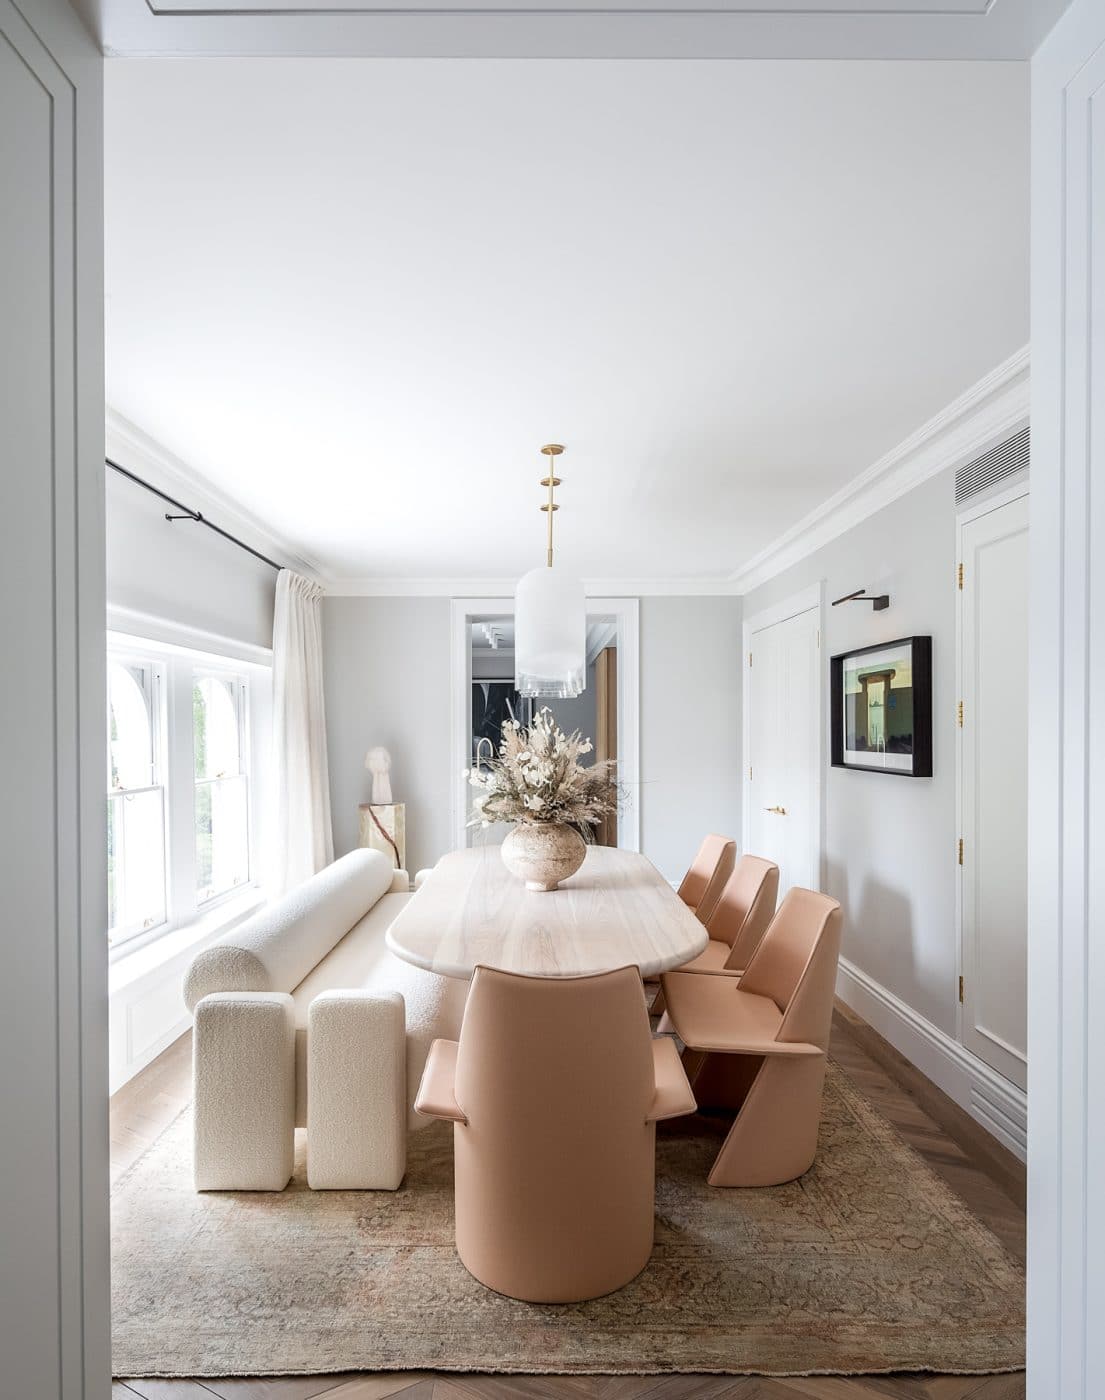 Banda interior design studio West London apartment dining room with low boucle bench and pink chairs at long oblong table